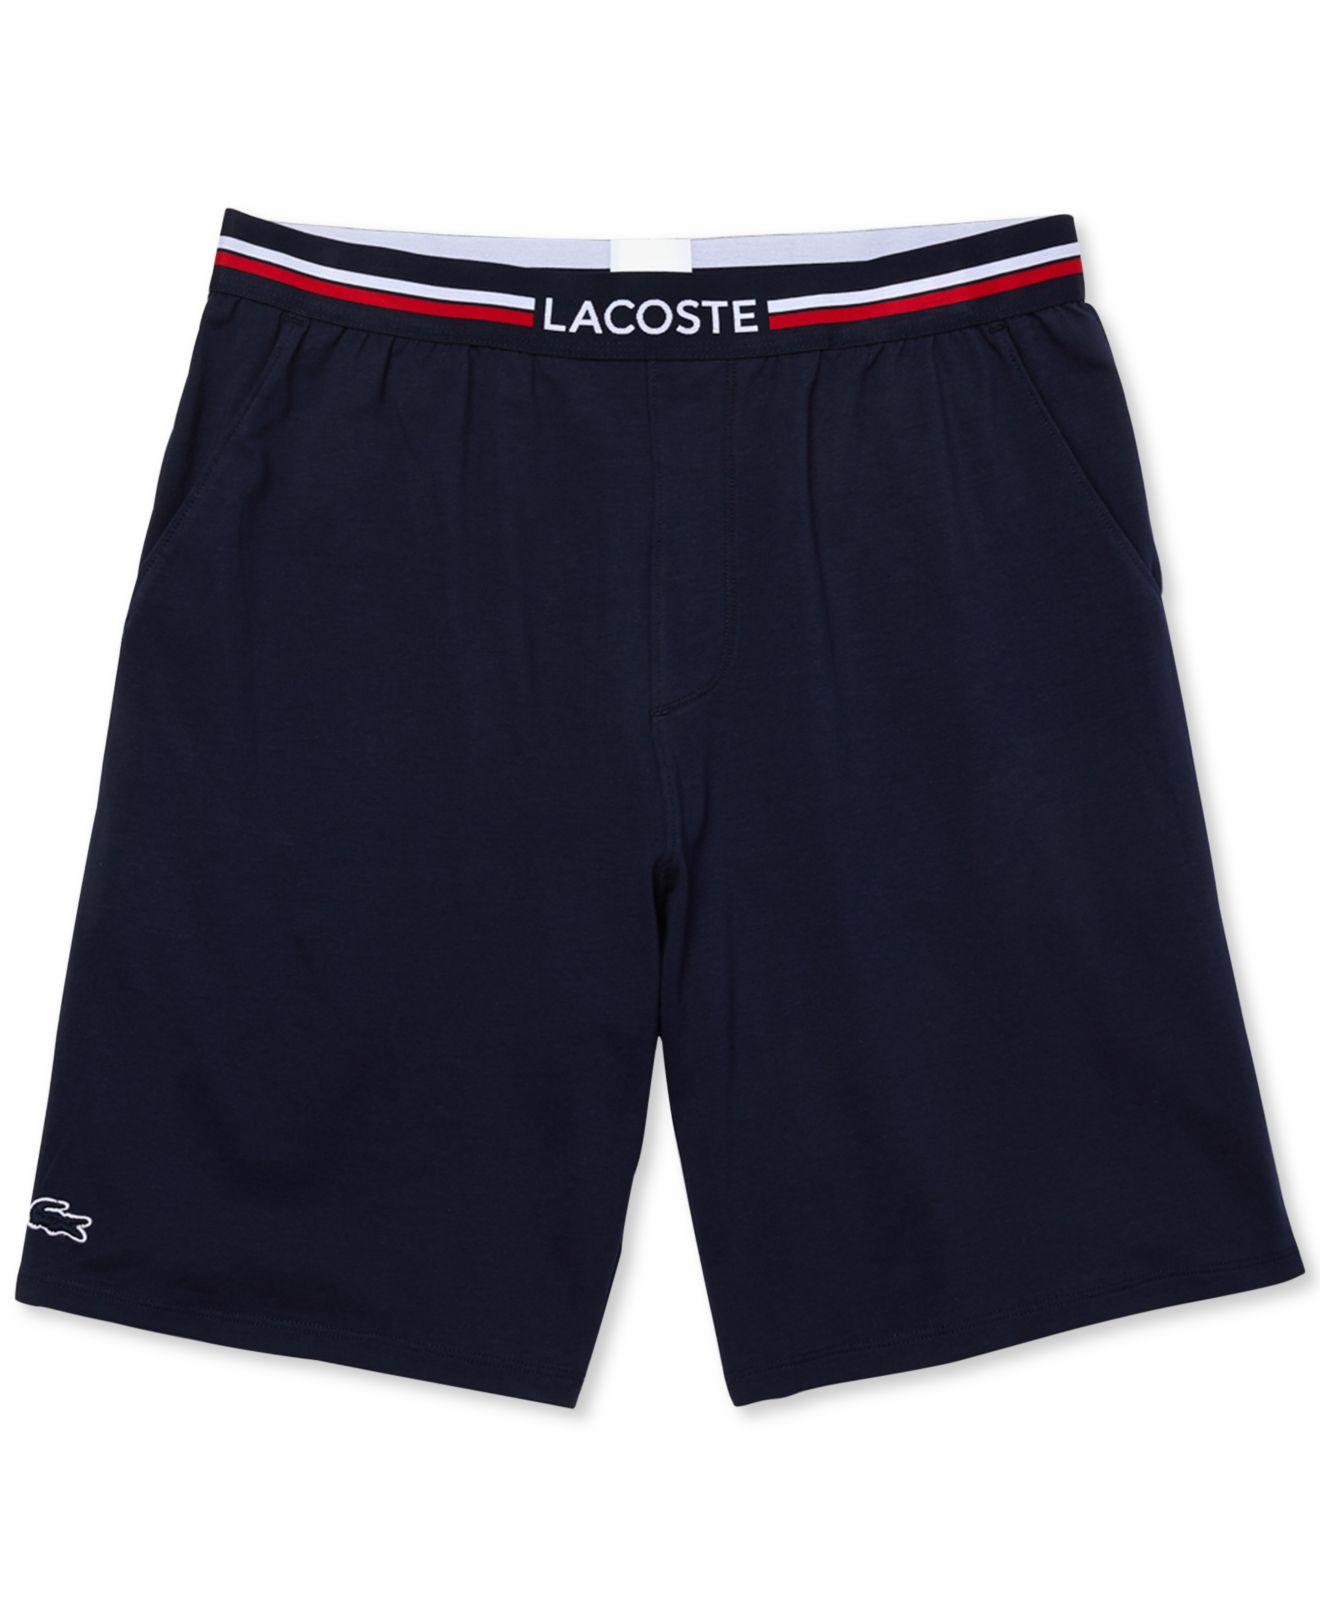 Lacoste Cotton Lounge Shorts In Navy Blue for Men - Lyst